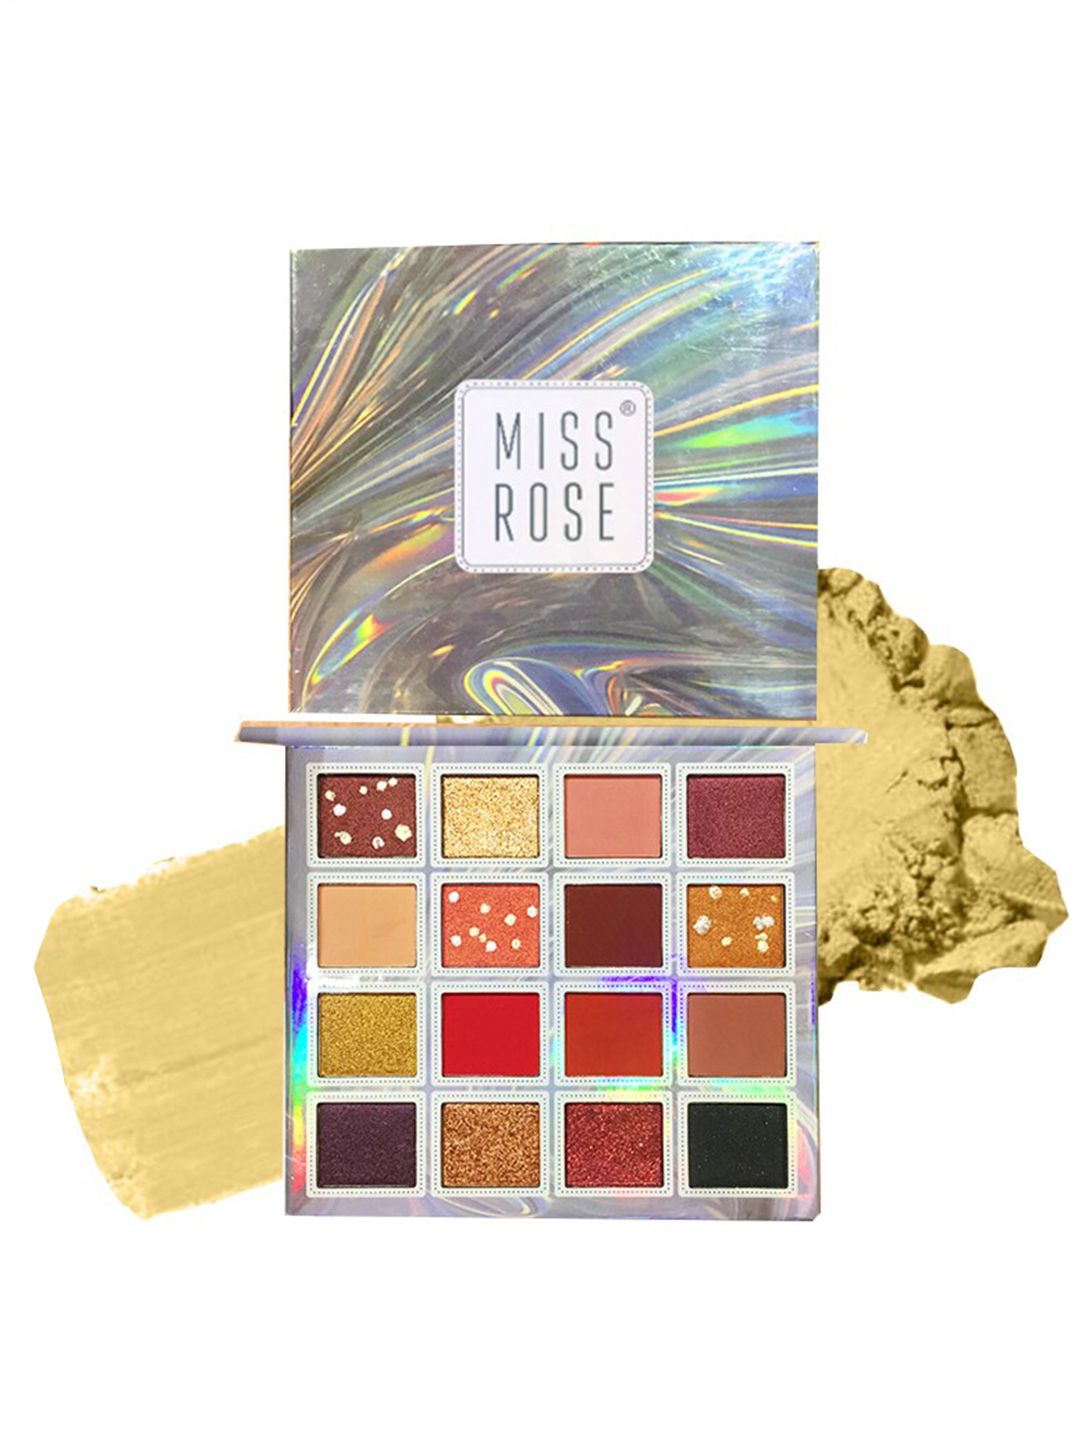 MISS ROSE Multi-color 3D Eyeshadow Palette- 7001-011 02 Price in India